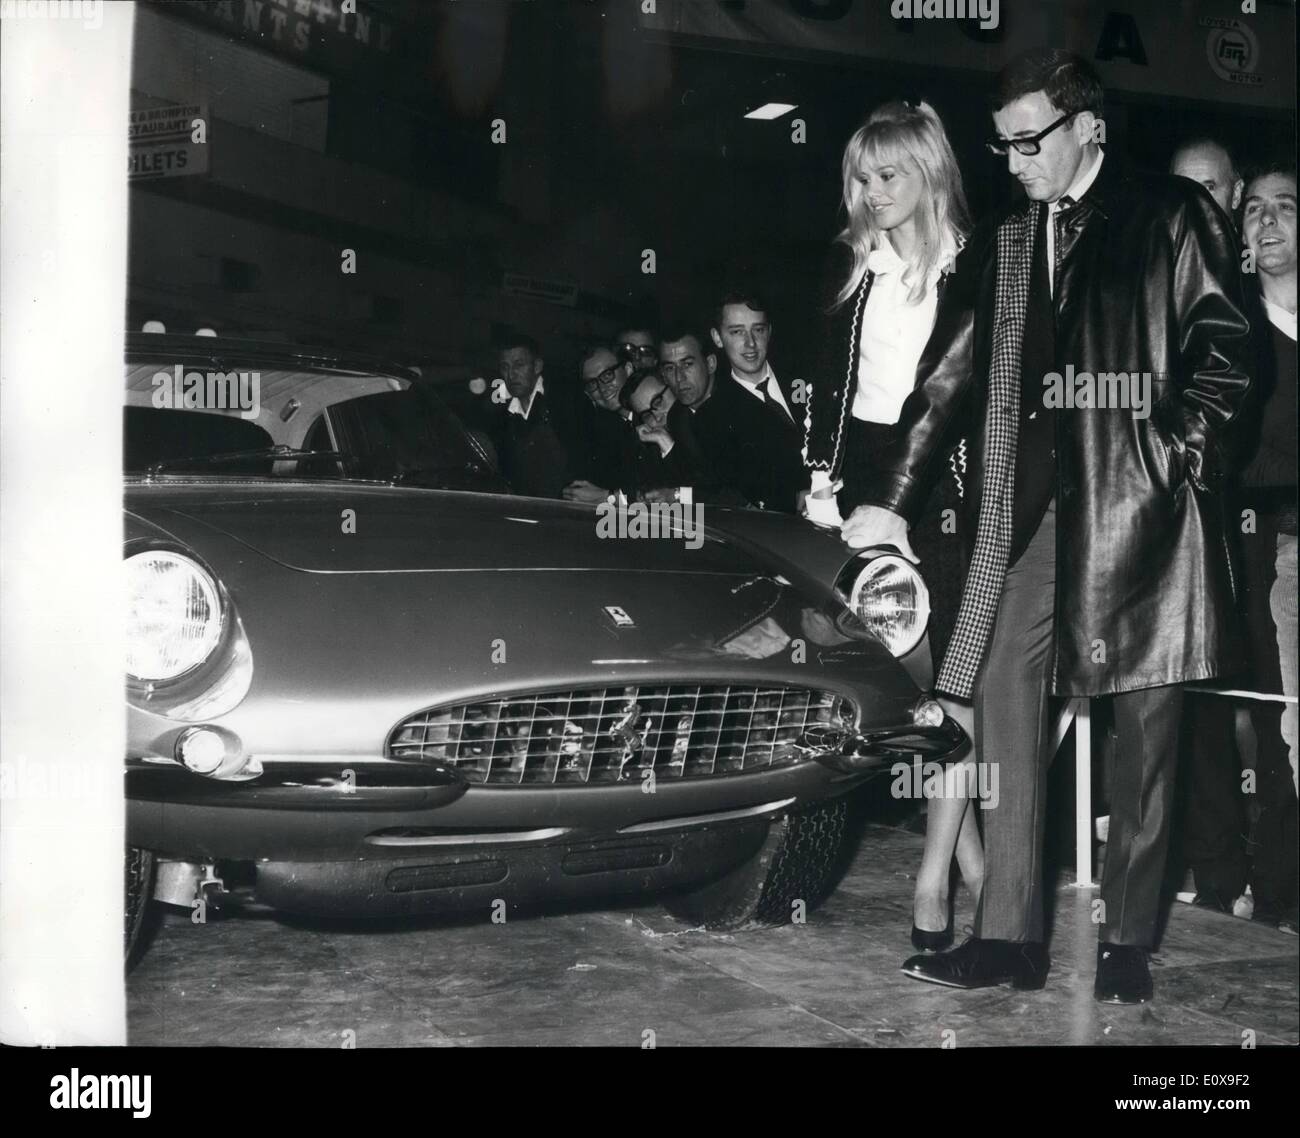 Oct. 10, 1965 - PREVIEW OF THE MOTOR SHOW AT EARLS COURT. PETER SELLERS BUYS ANOTHER CAR FOR &pound;11,500. PHOTO SHOWSPeter SellersPeter Sellers and his wife Britt Ekland looking at the new Ferrari 500 Super fast Coupe, which Peter has bought for &pound;11,500, seen at the show today. Stock Photo